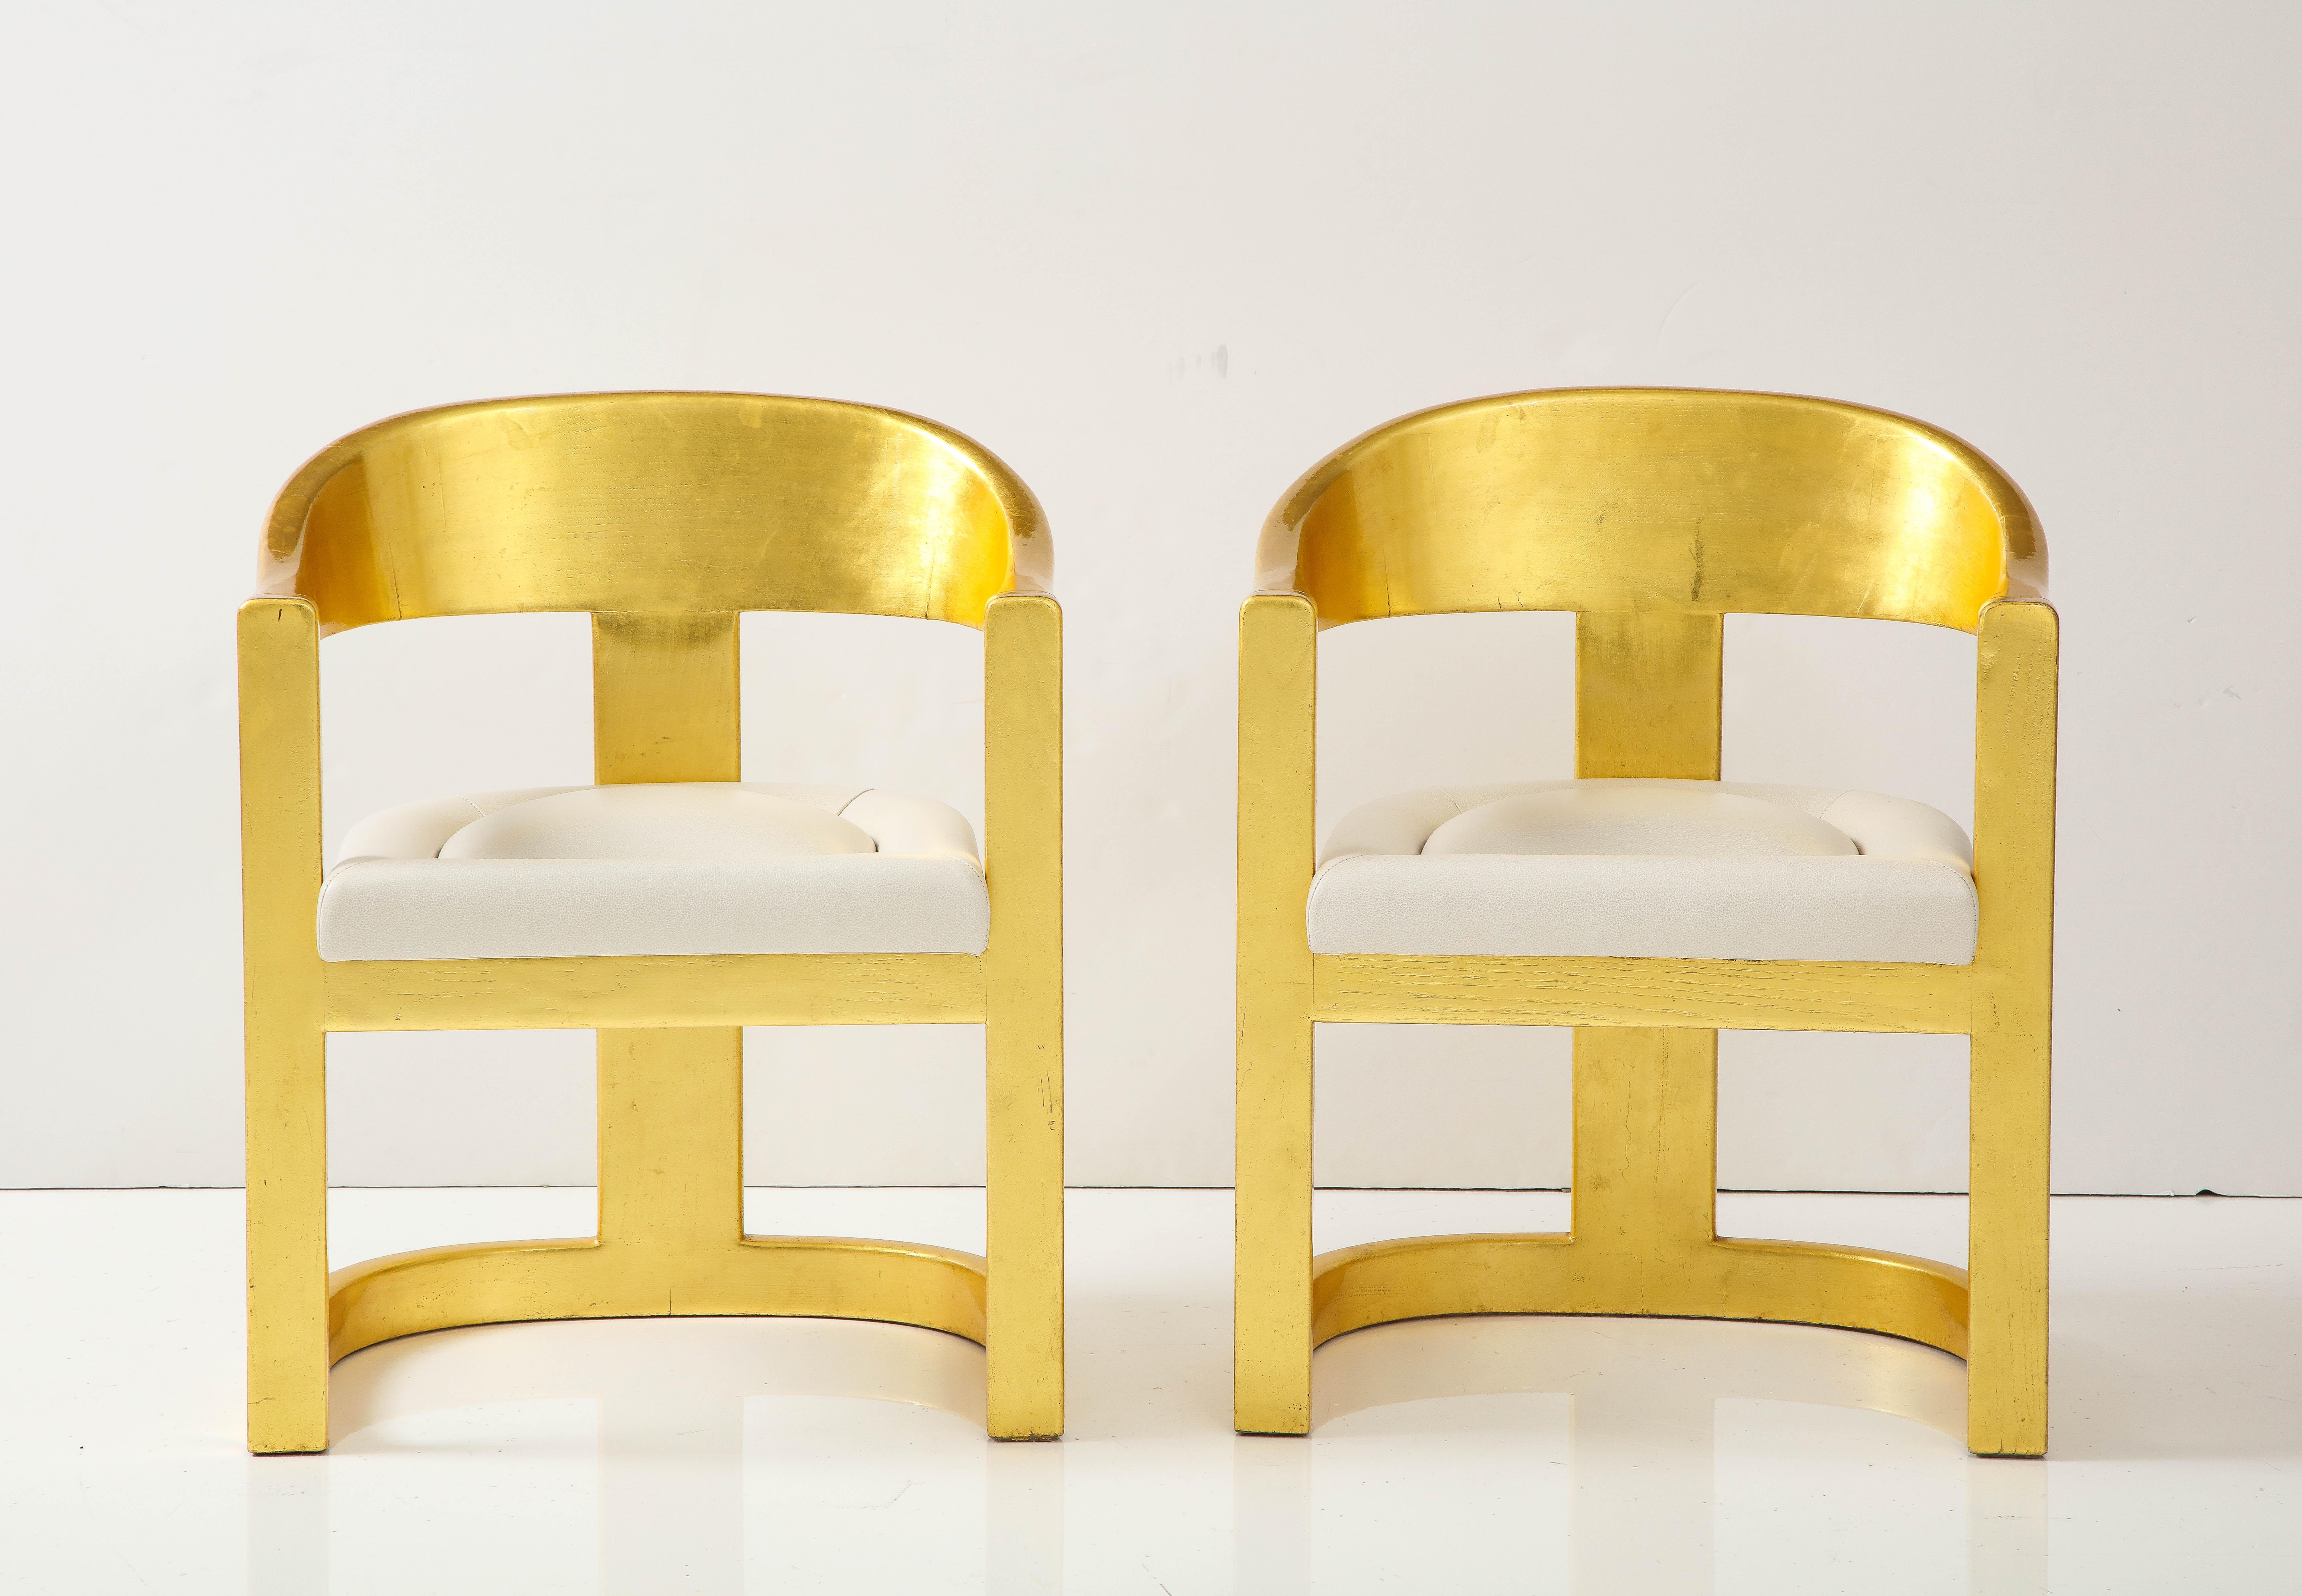 Set of 6 Karl Springer Onassis chairs with leather upholstery.
The Iconic Onassis chair is one of Karl Springers most famous designs and the beautiful lines contour to 
the body perfectly. The 6 vintage gold finished chairs have age appropriate